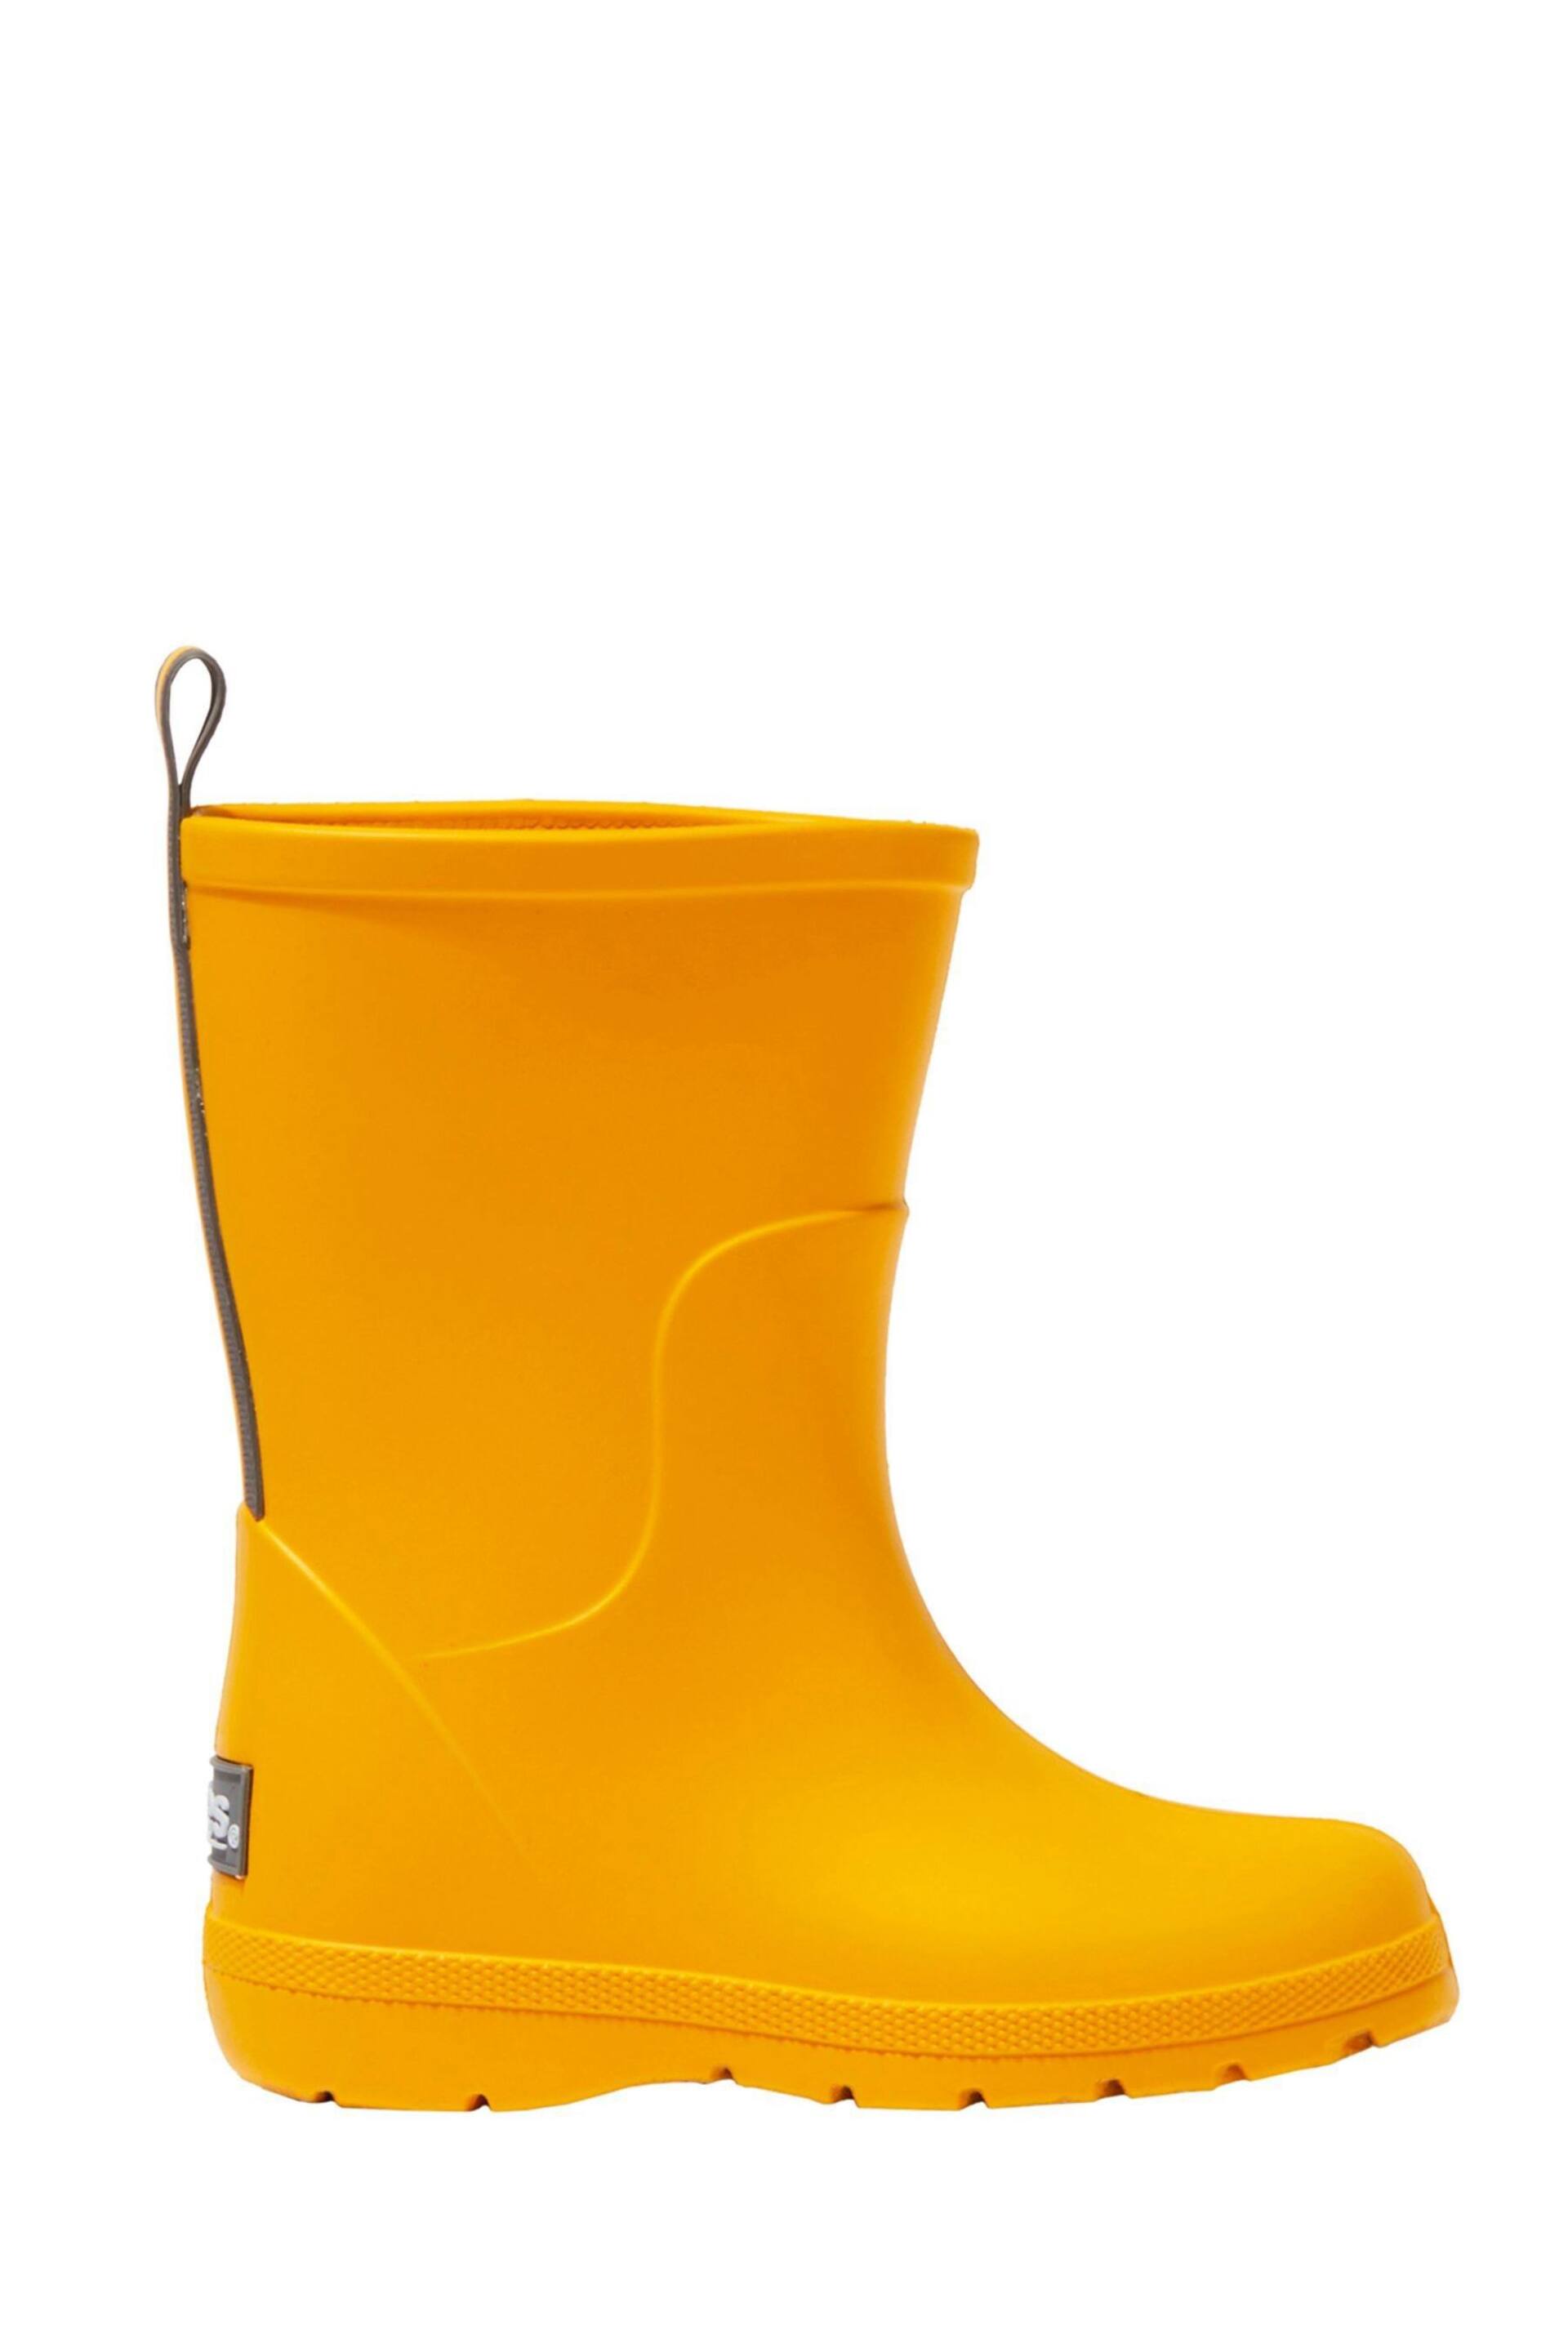 Totes Yellow Childrens Charley Welly Boots - Image 2 of 6